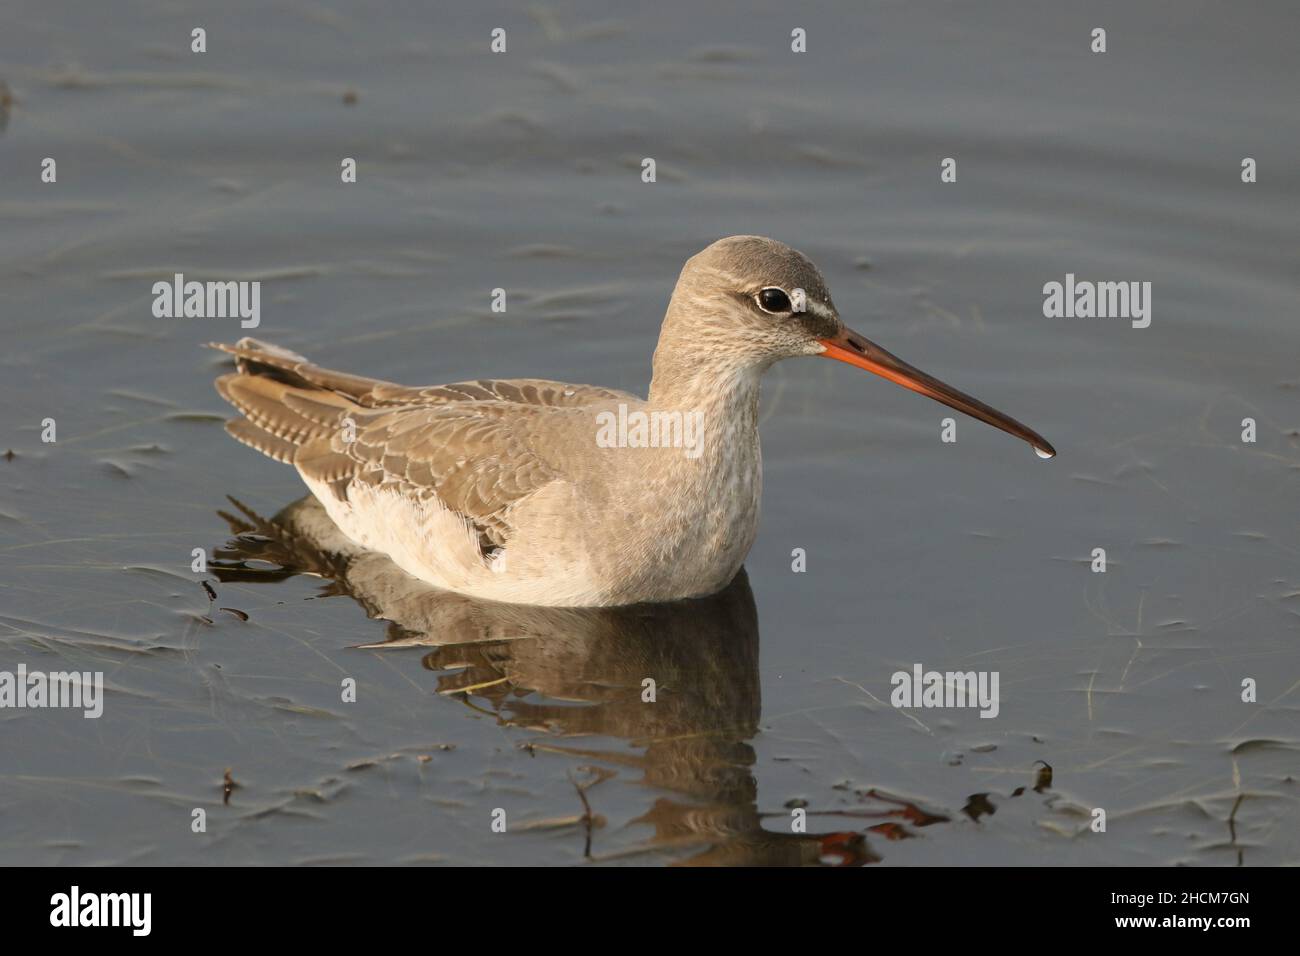 Spotted redshank in Winter plumage, as breeding plumage is black with black legs. An elegant wader that utilises deeper water than a redshank. Stock Photo